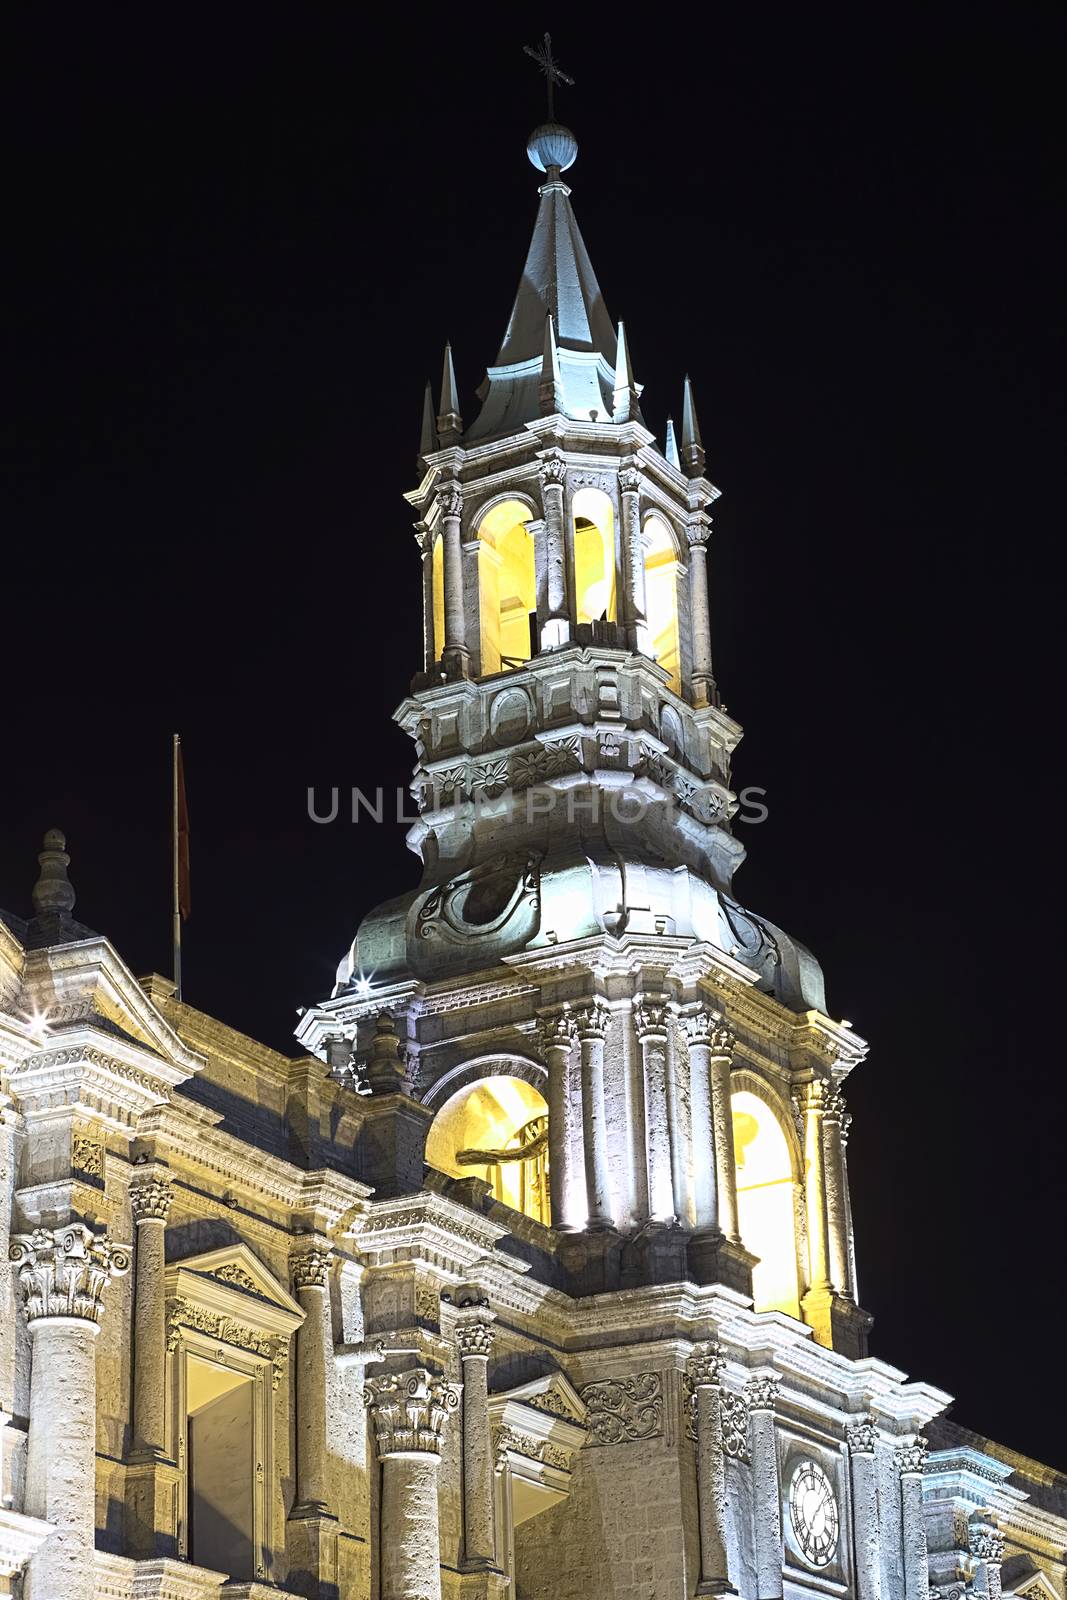 The steeple of the Basilica Cathedral on Plaza de Armas in Arequipa in Southern Peru photographed at night. The historic city center of Arequipa is an UNESCO World Cultural Heritage Site. 